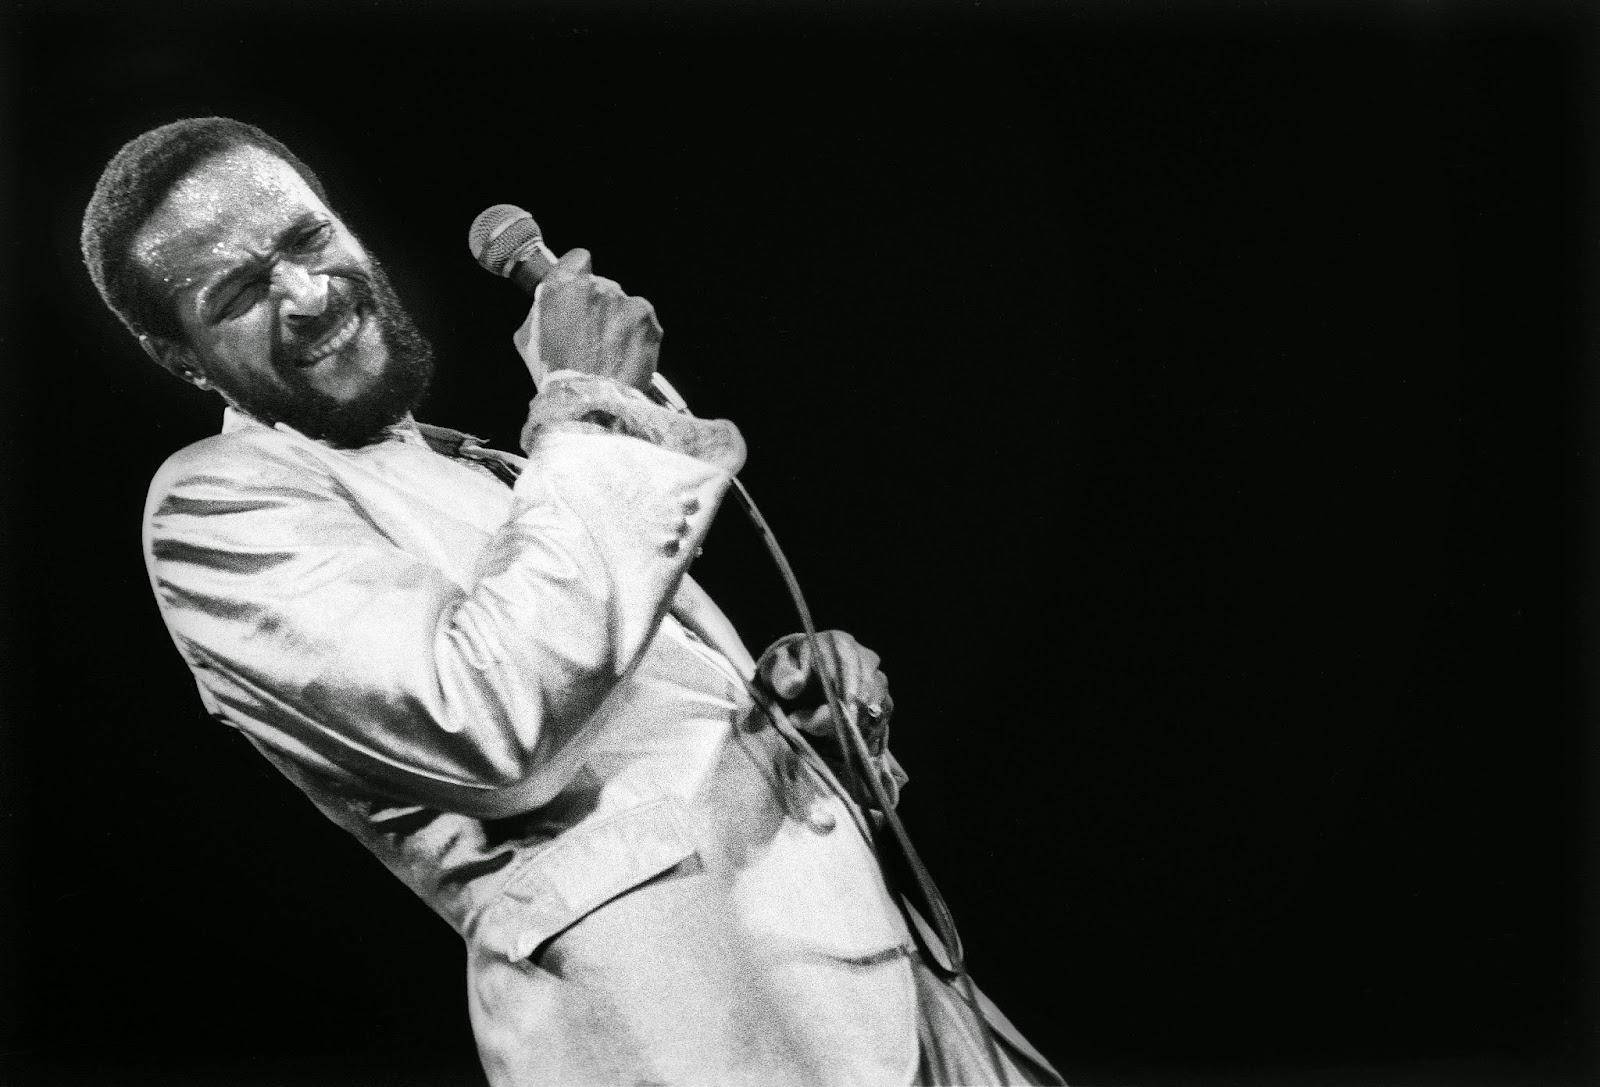 Marvin Gaye Holding Microphone Wallpaper